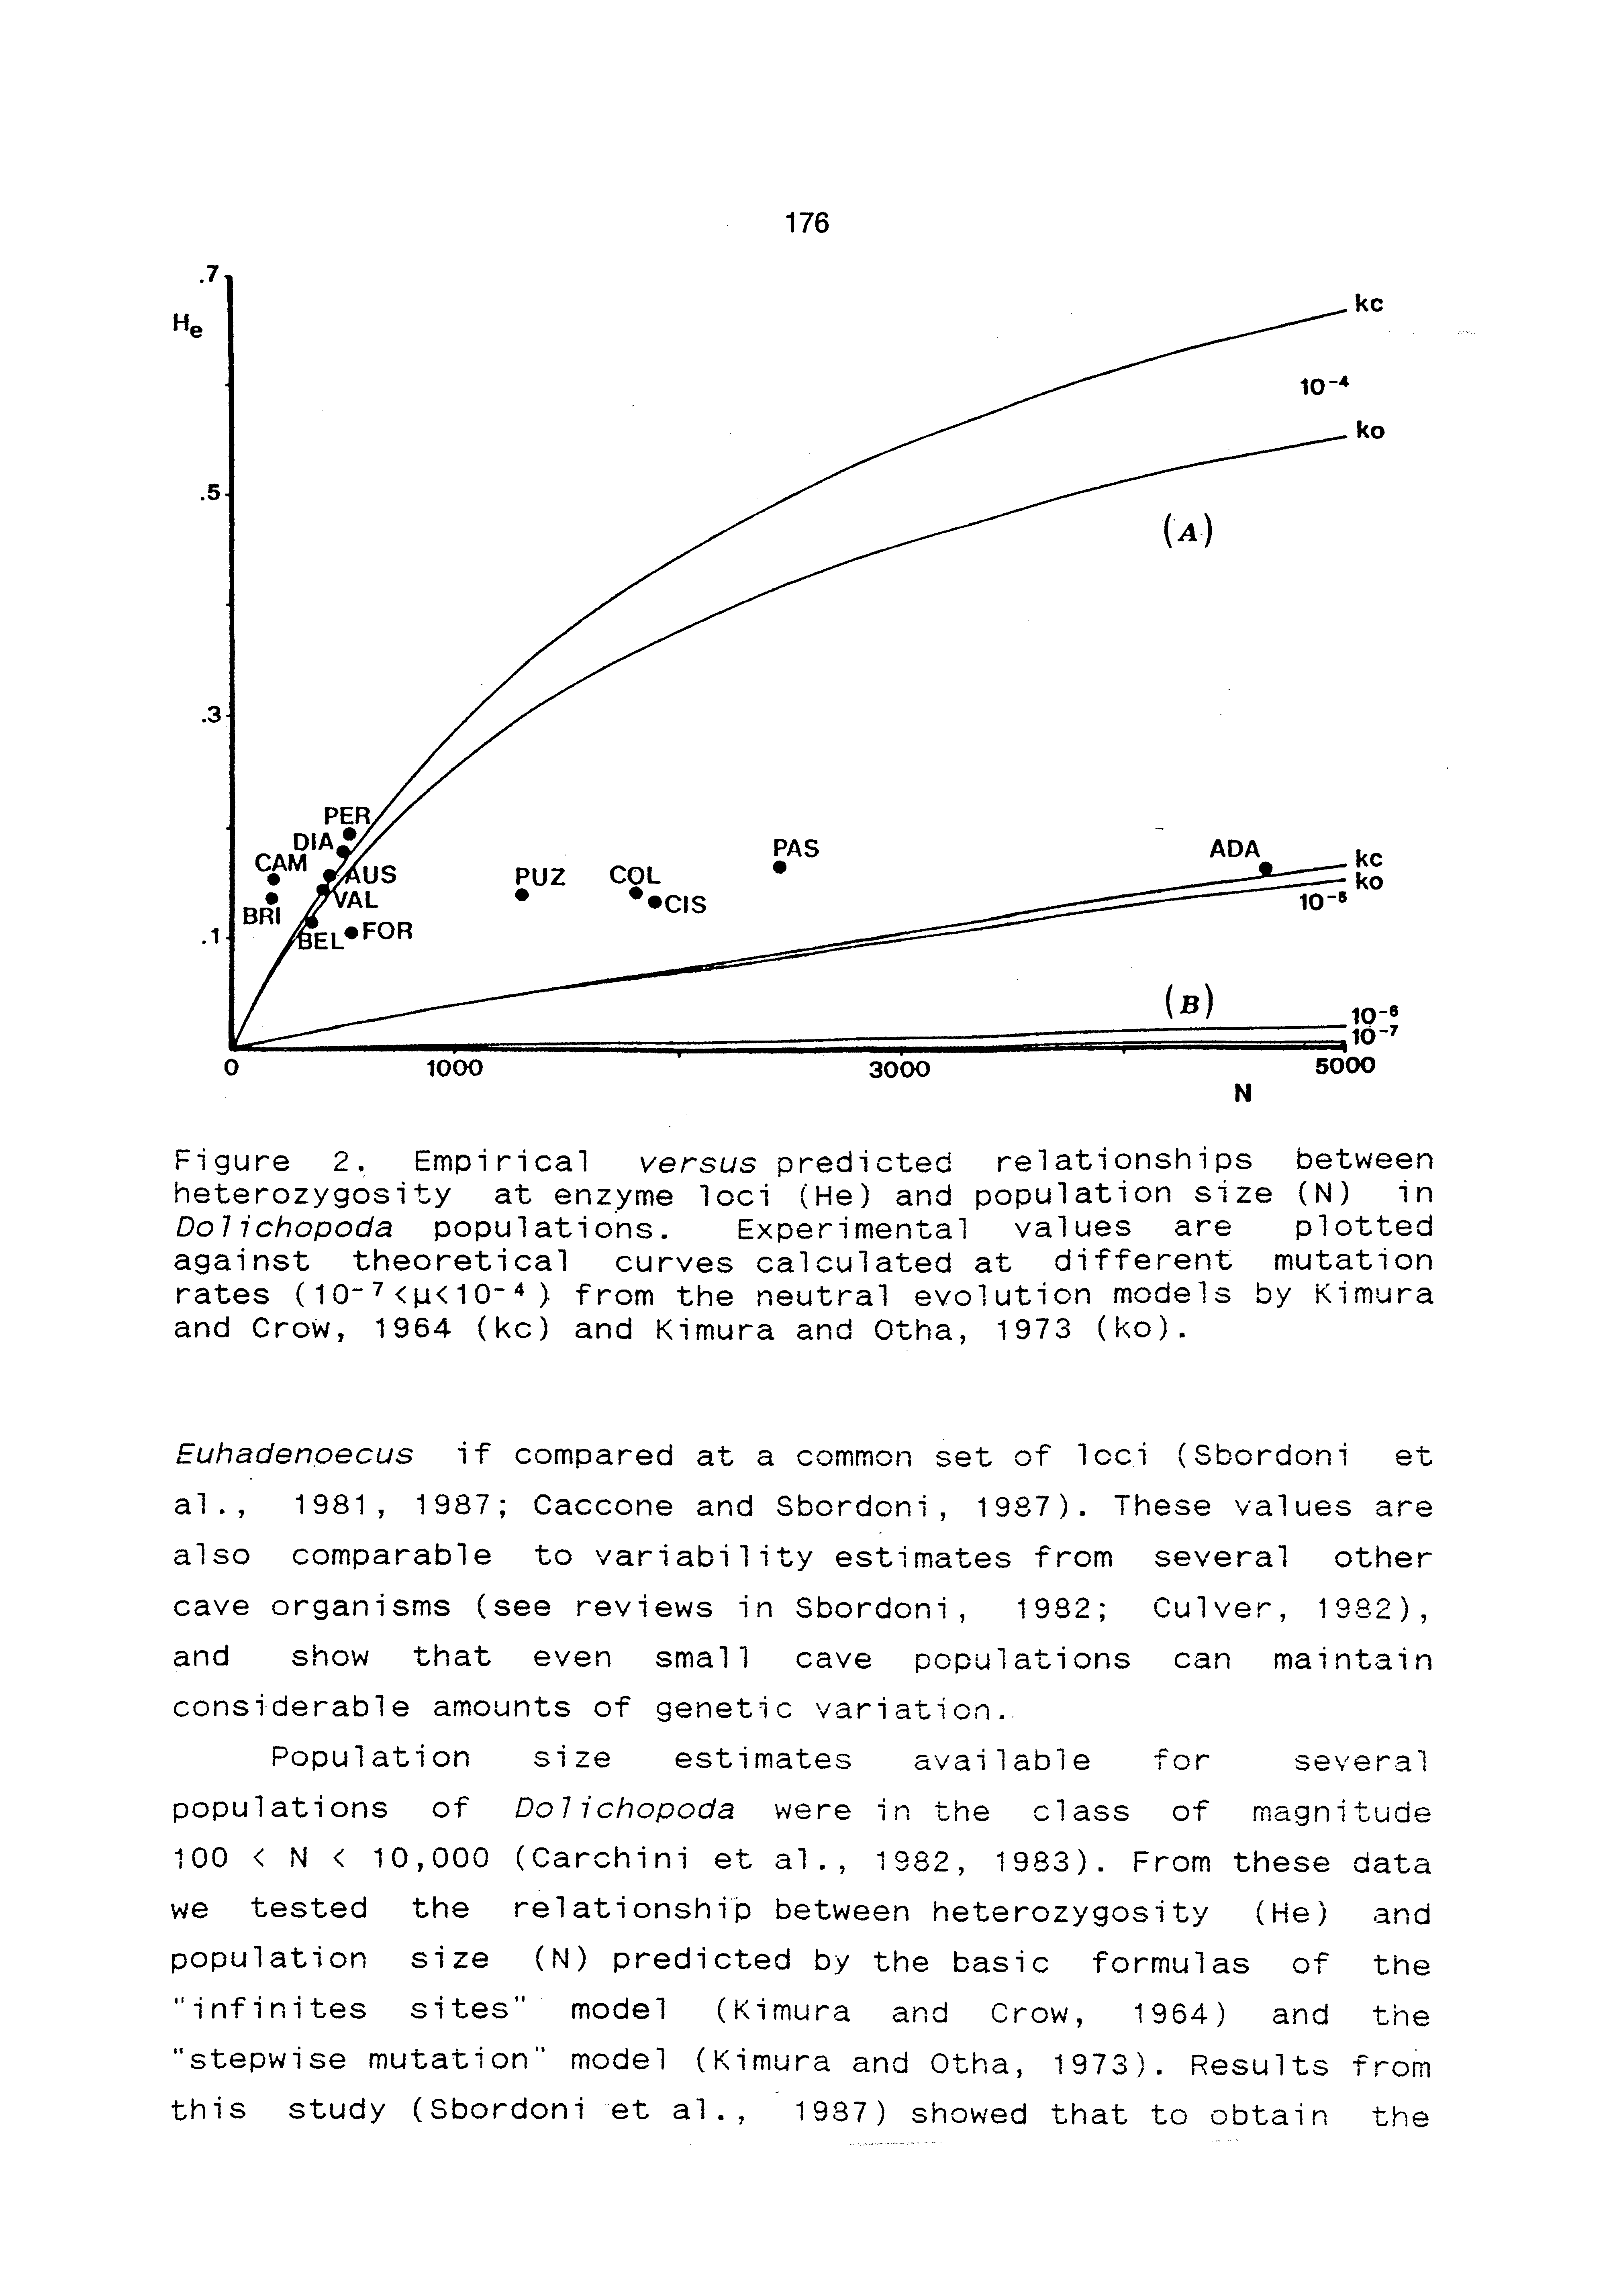 Figure 2. Empirical versus predicted relationships between heterozygosity at enzyme loci (He) and population size (N) in Dolichopoda populations. Experimental values are plotted against theoretical curves calculated at different mutation rates (10 <m< 10"" ) from the neutral evolution models by Kimura and Crow, 1964 (kc) and Kimura and Otha, 1973 (ko).